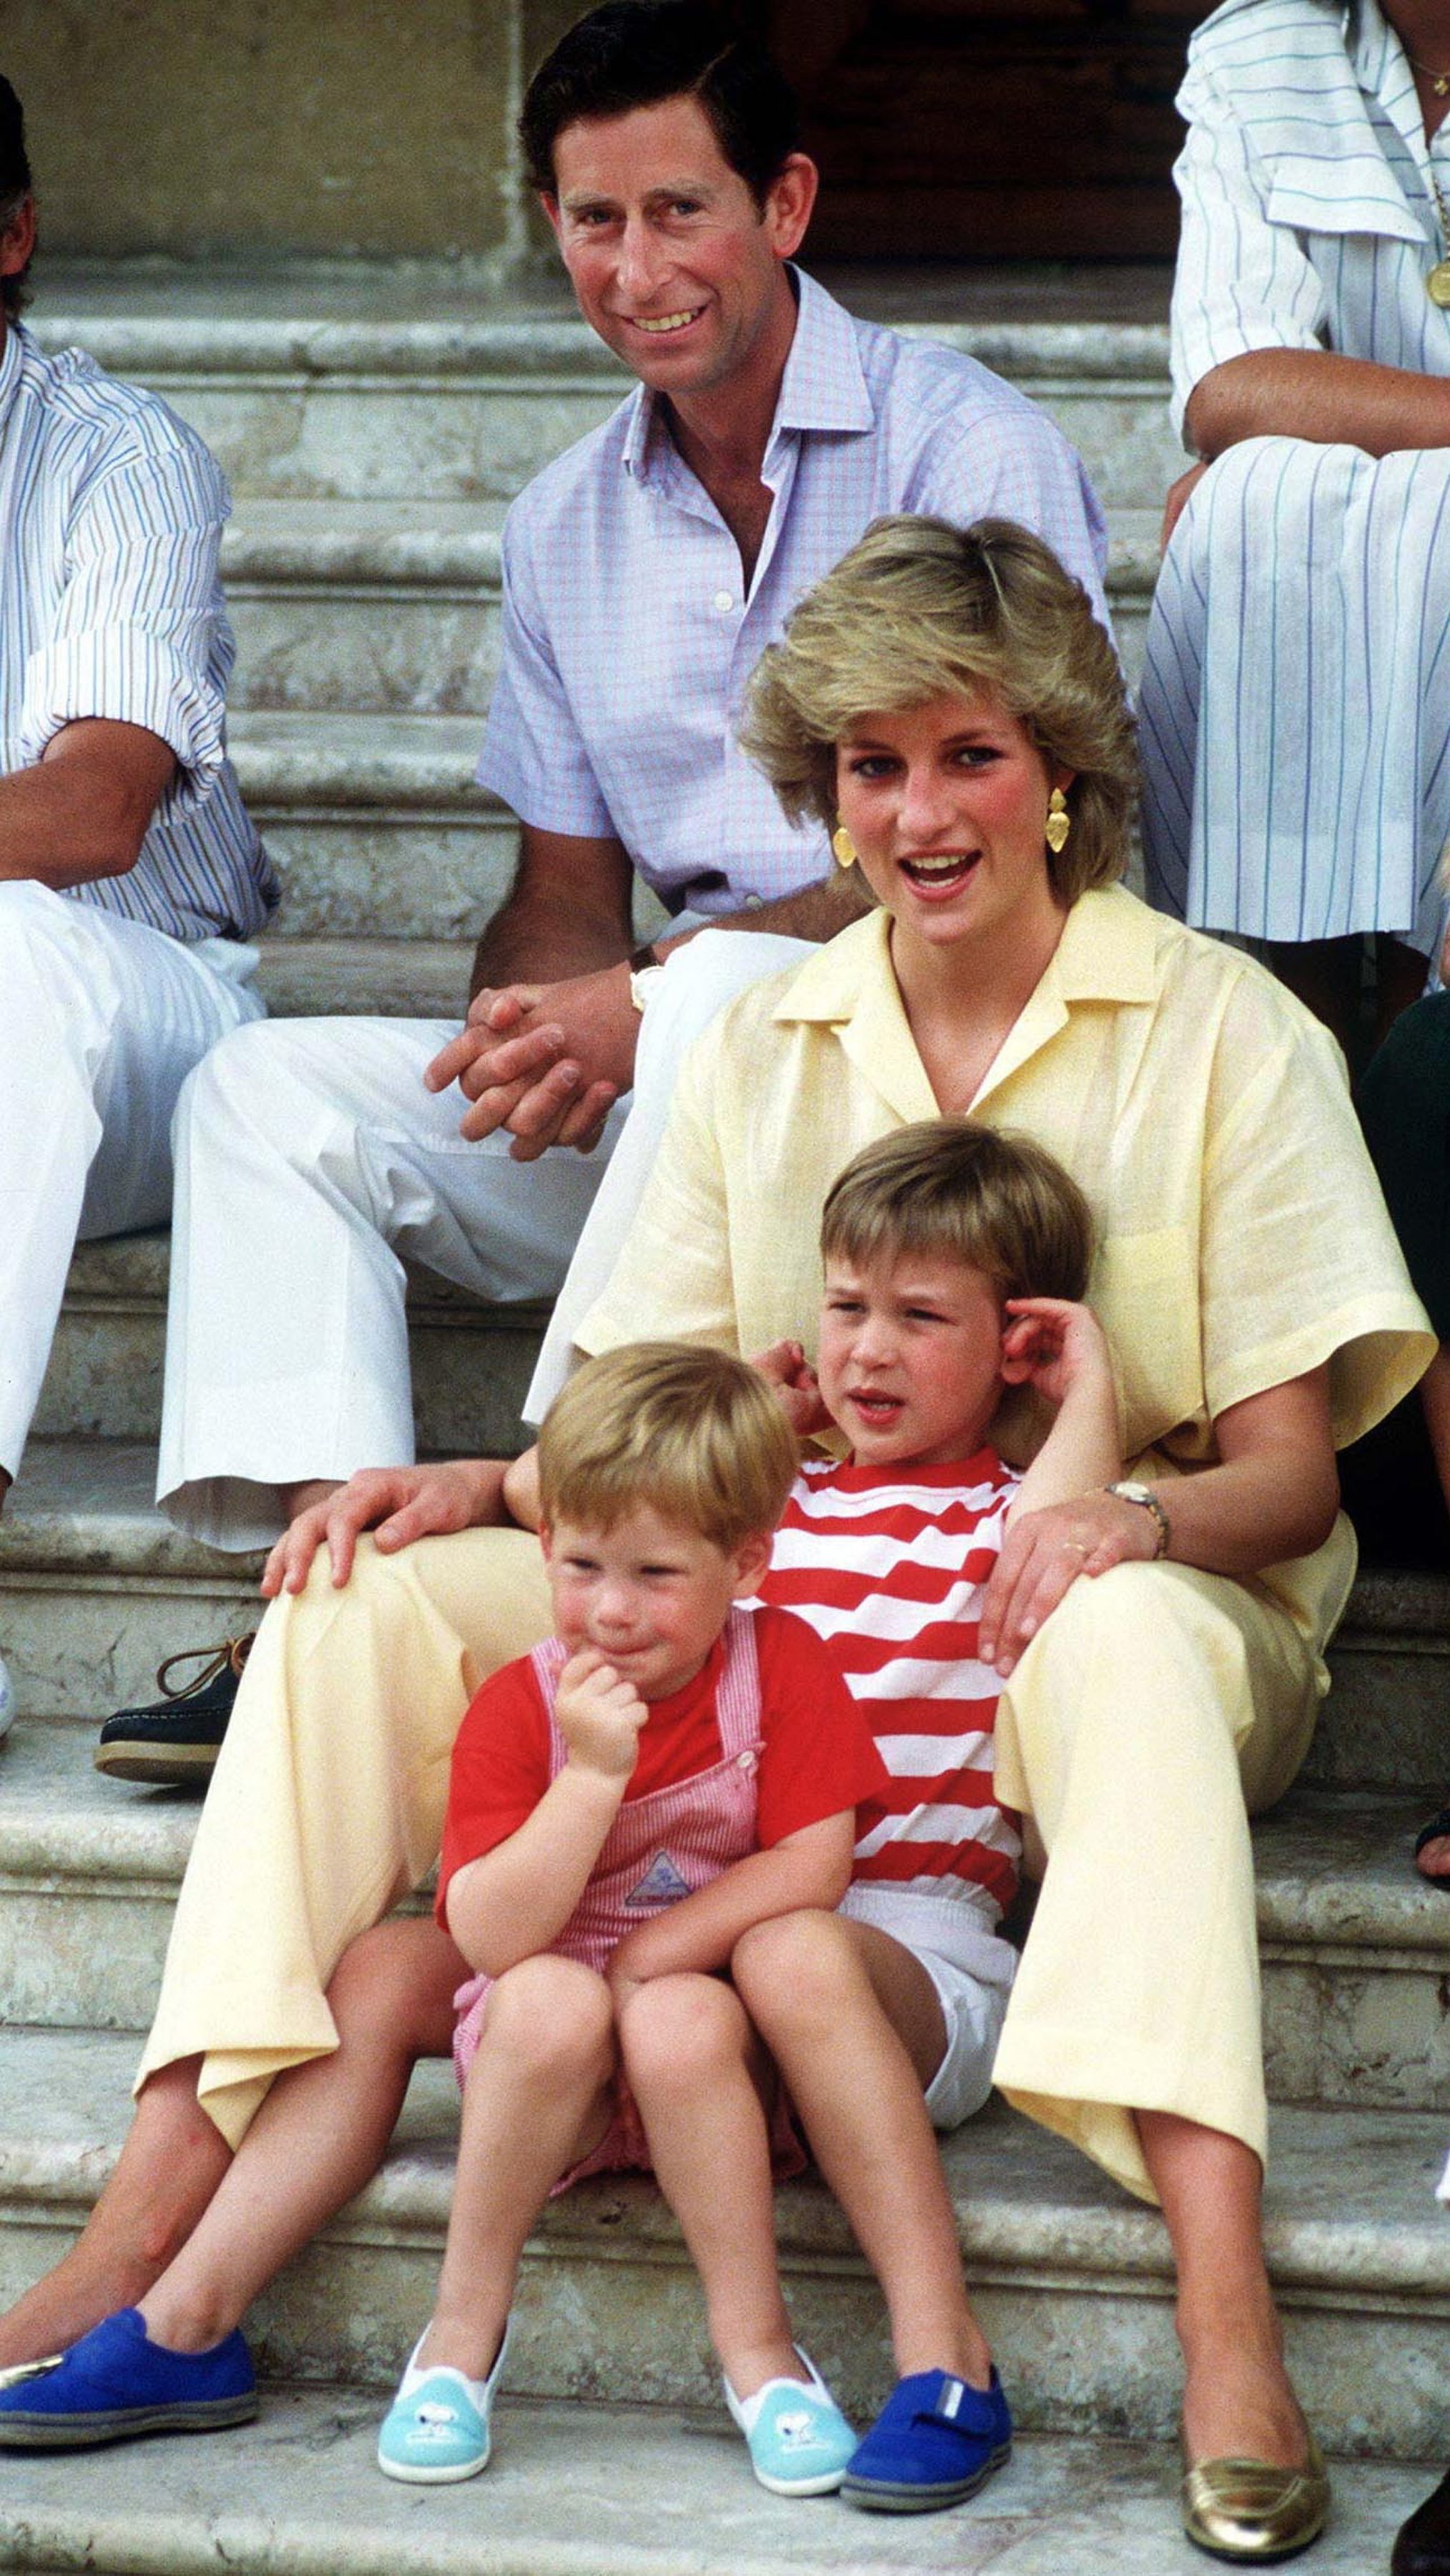 The Prince and Princess of Wales on holiday with their children, Princes William and Harry, at the Spanish royal residence Marivent Palace, August 1987. | Source: Getty Images